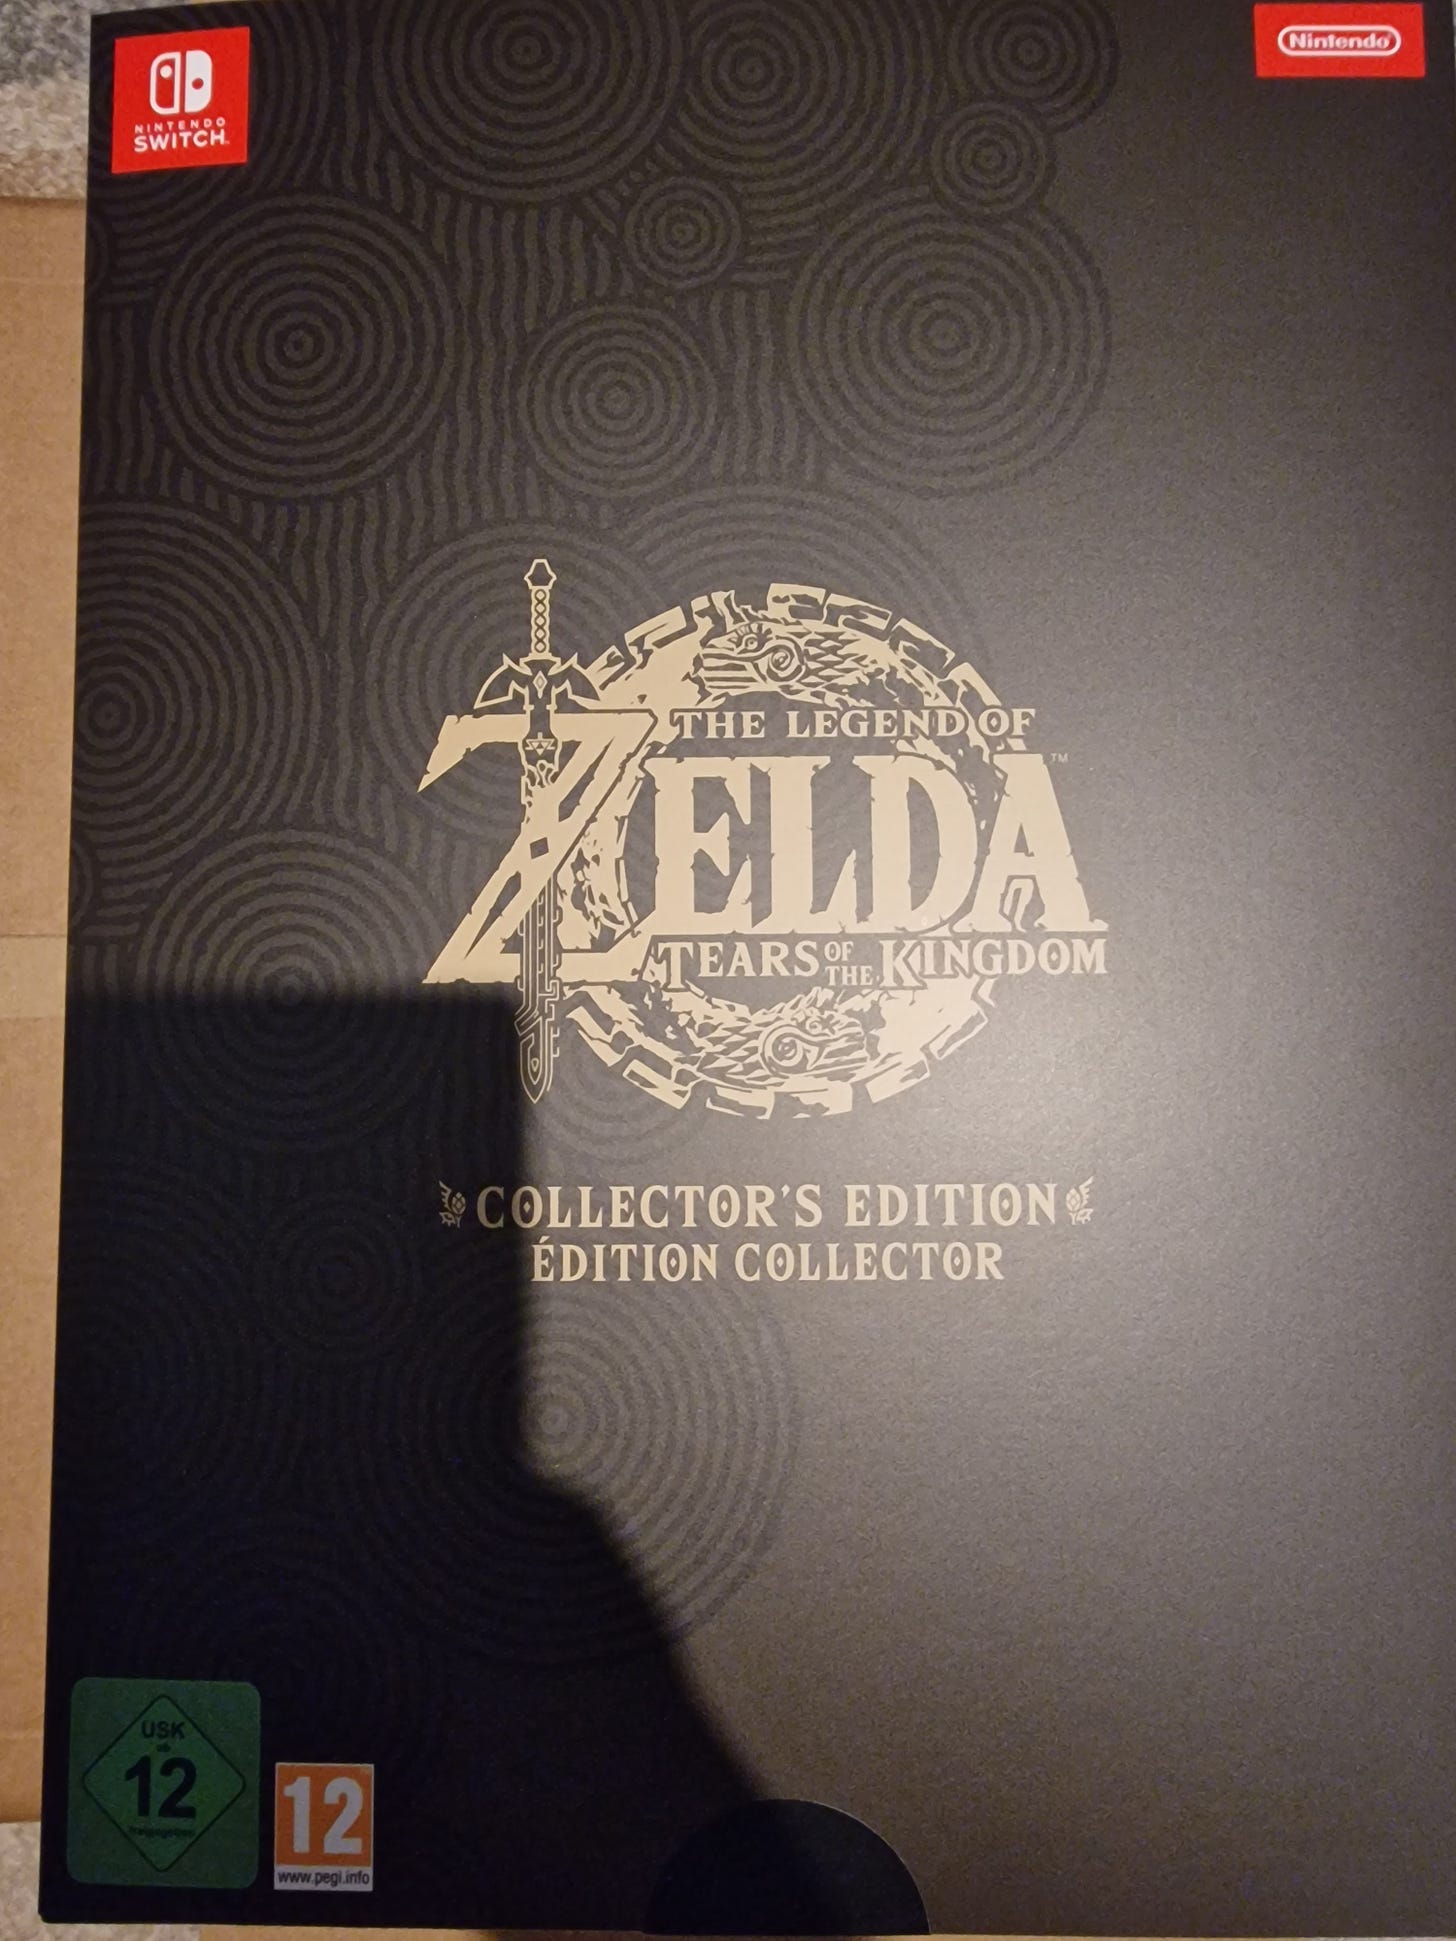 Collectors Edition Box which is black and gold logo printed on the front